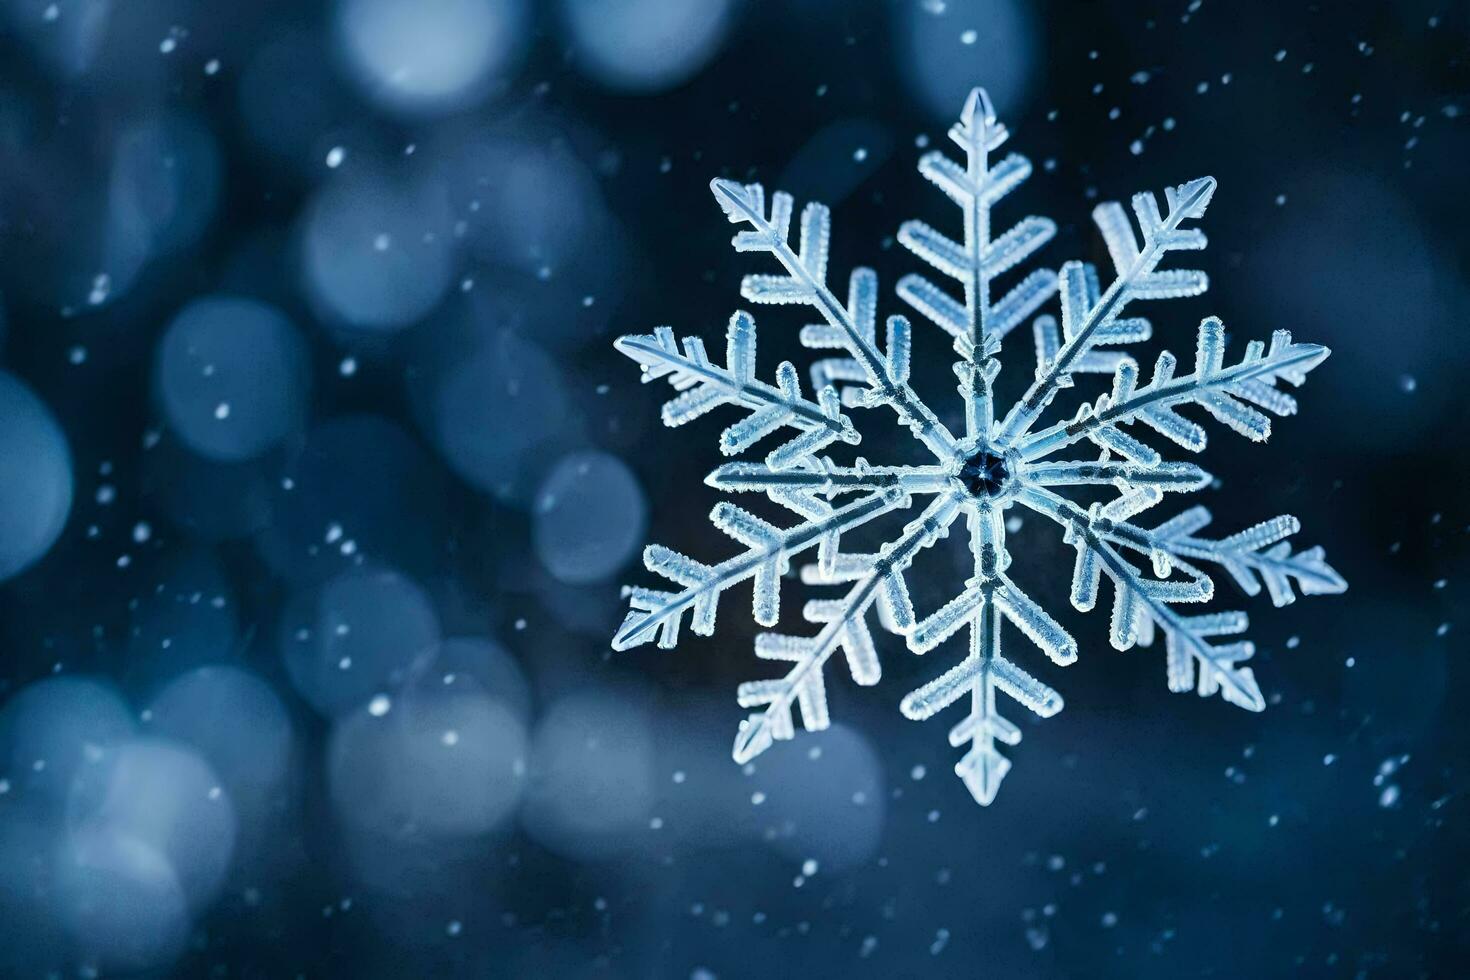 AI generated a snowflake is shown in the middle of a dark background photo